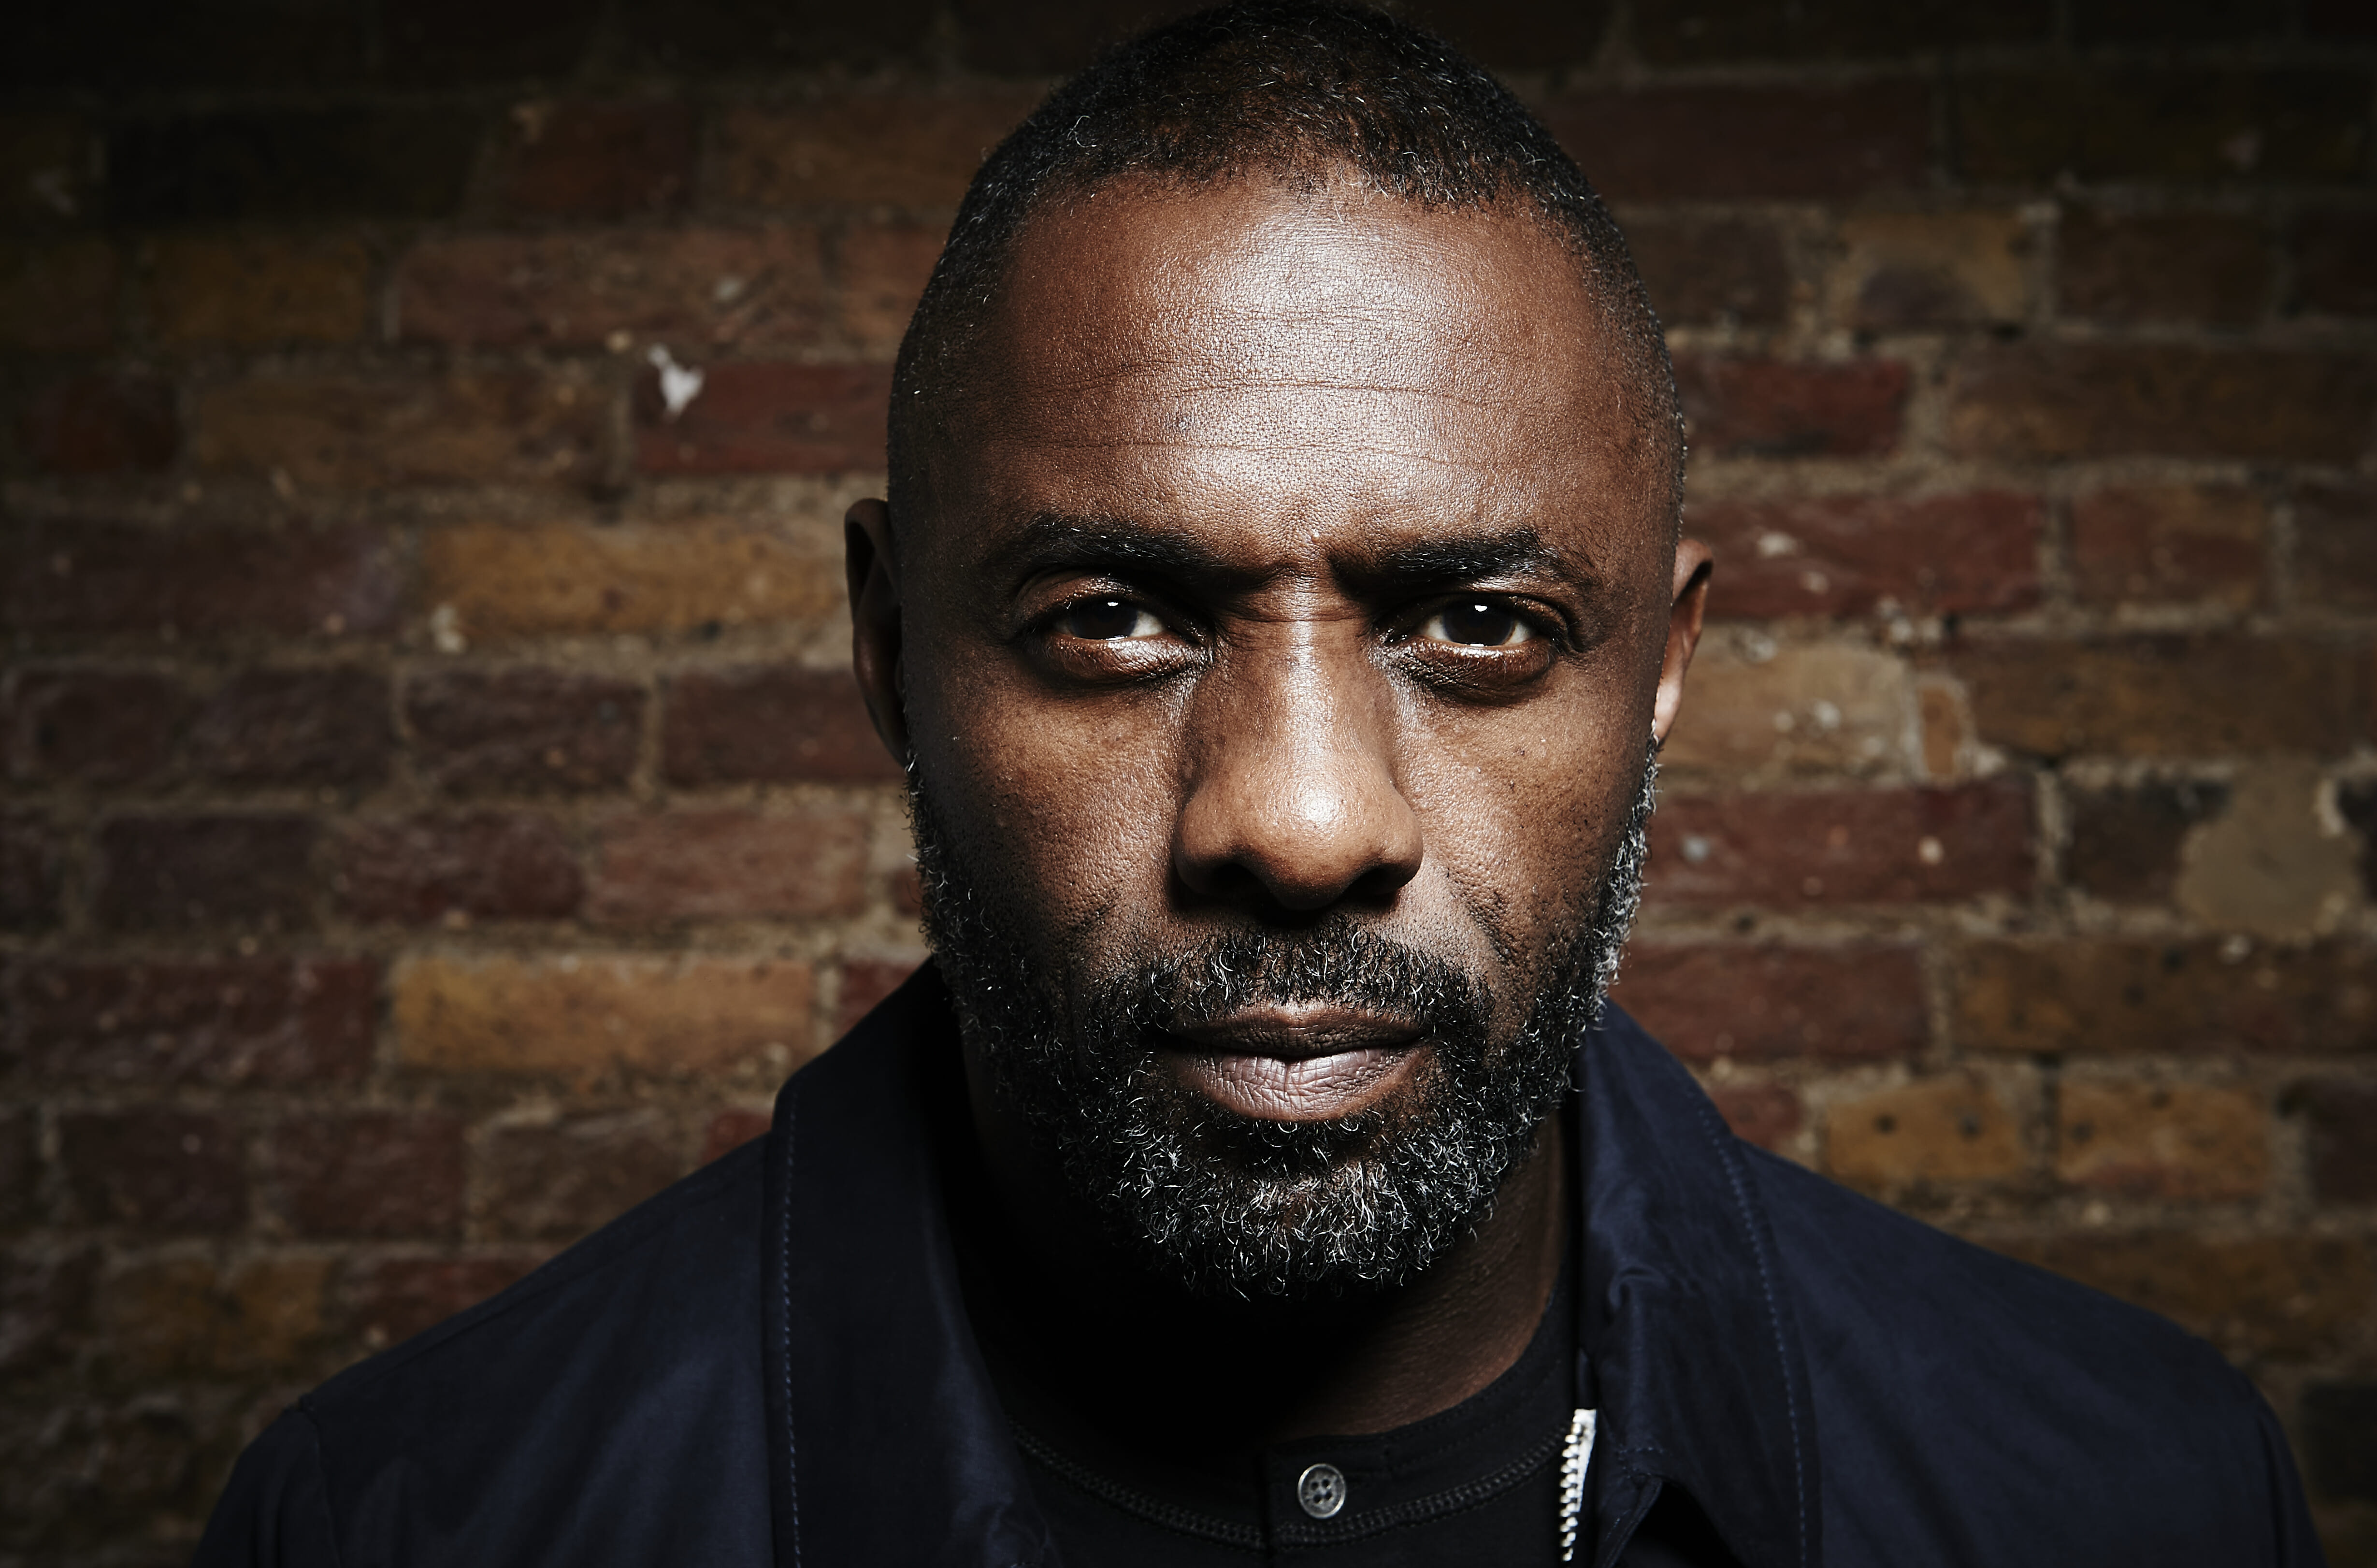 Purdey’s Thrive On Campaign with Idris Elba